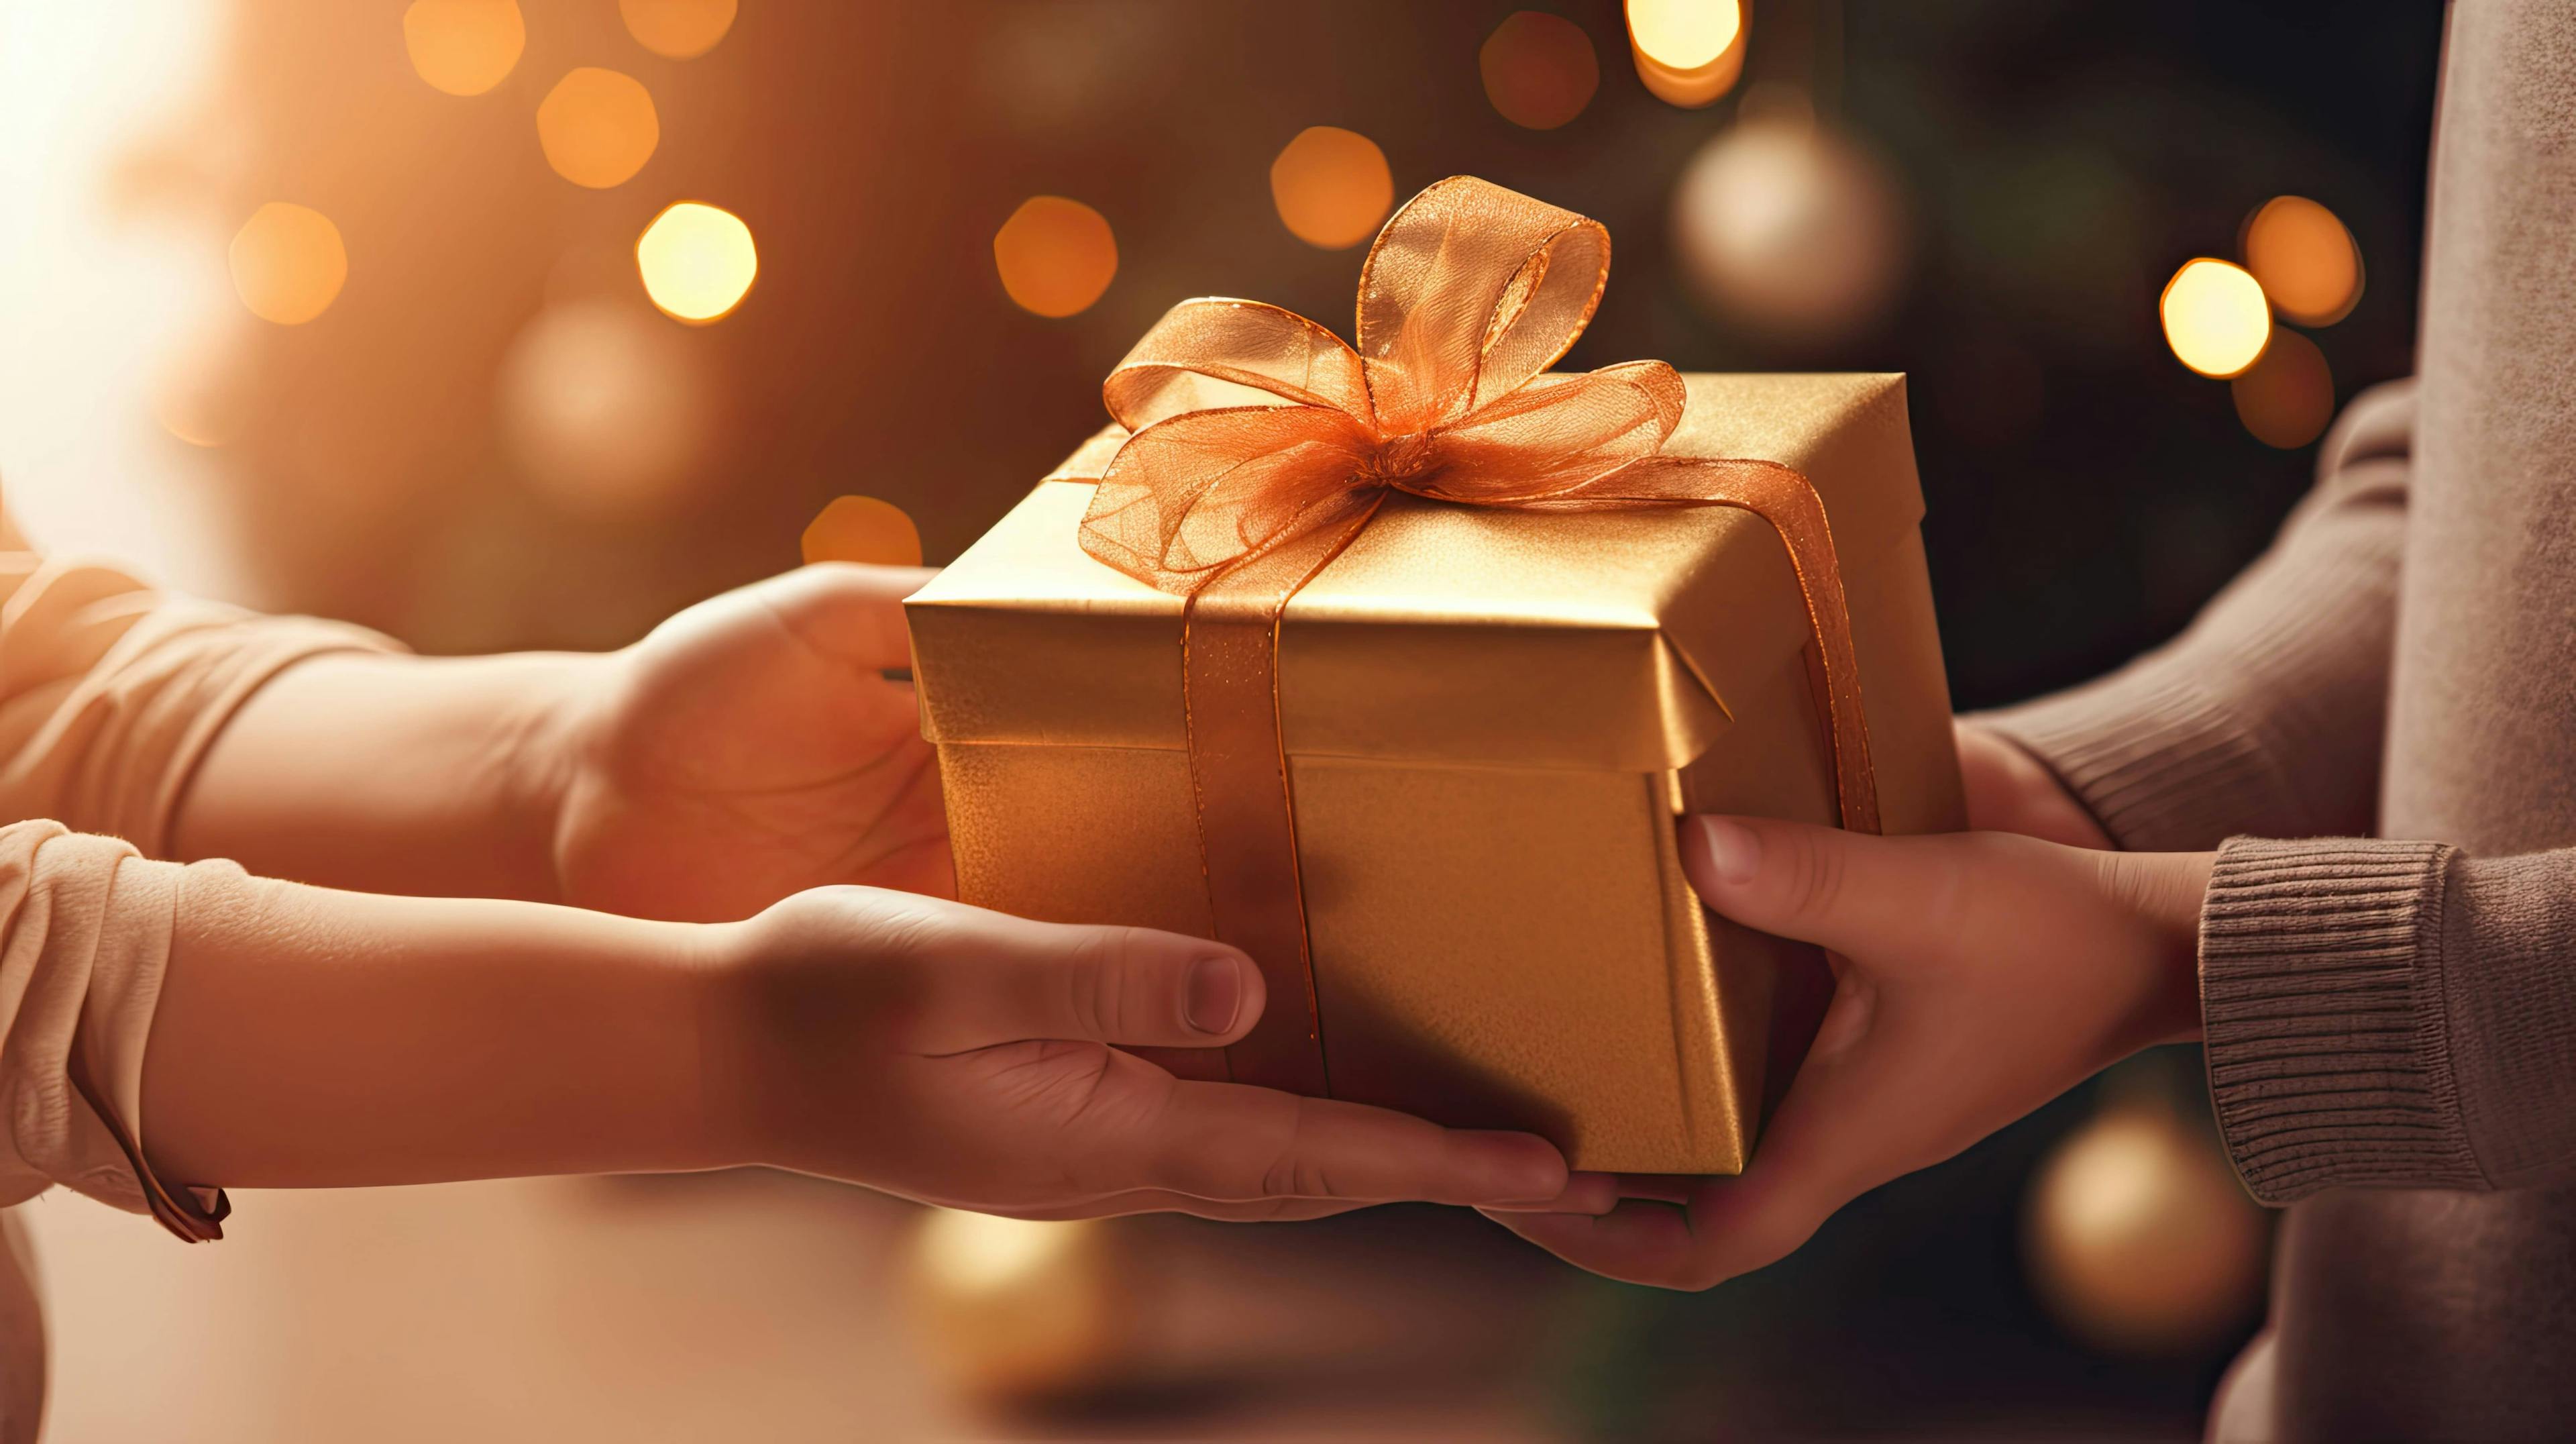 How To Choose Impactful Client Gifts That Stand Out